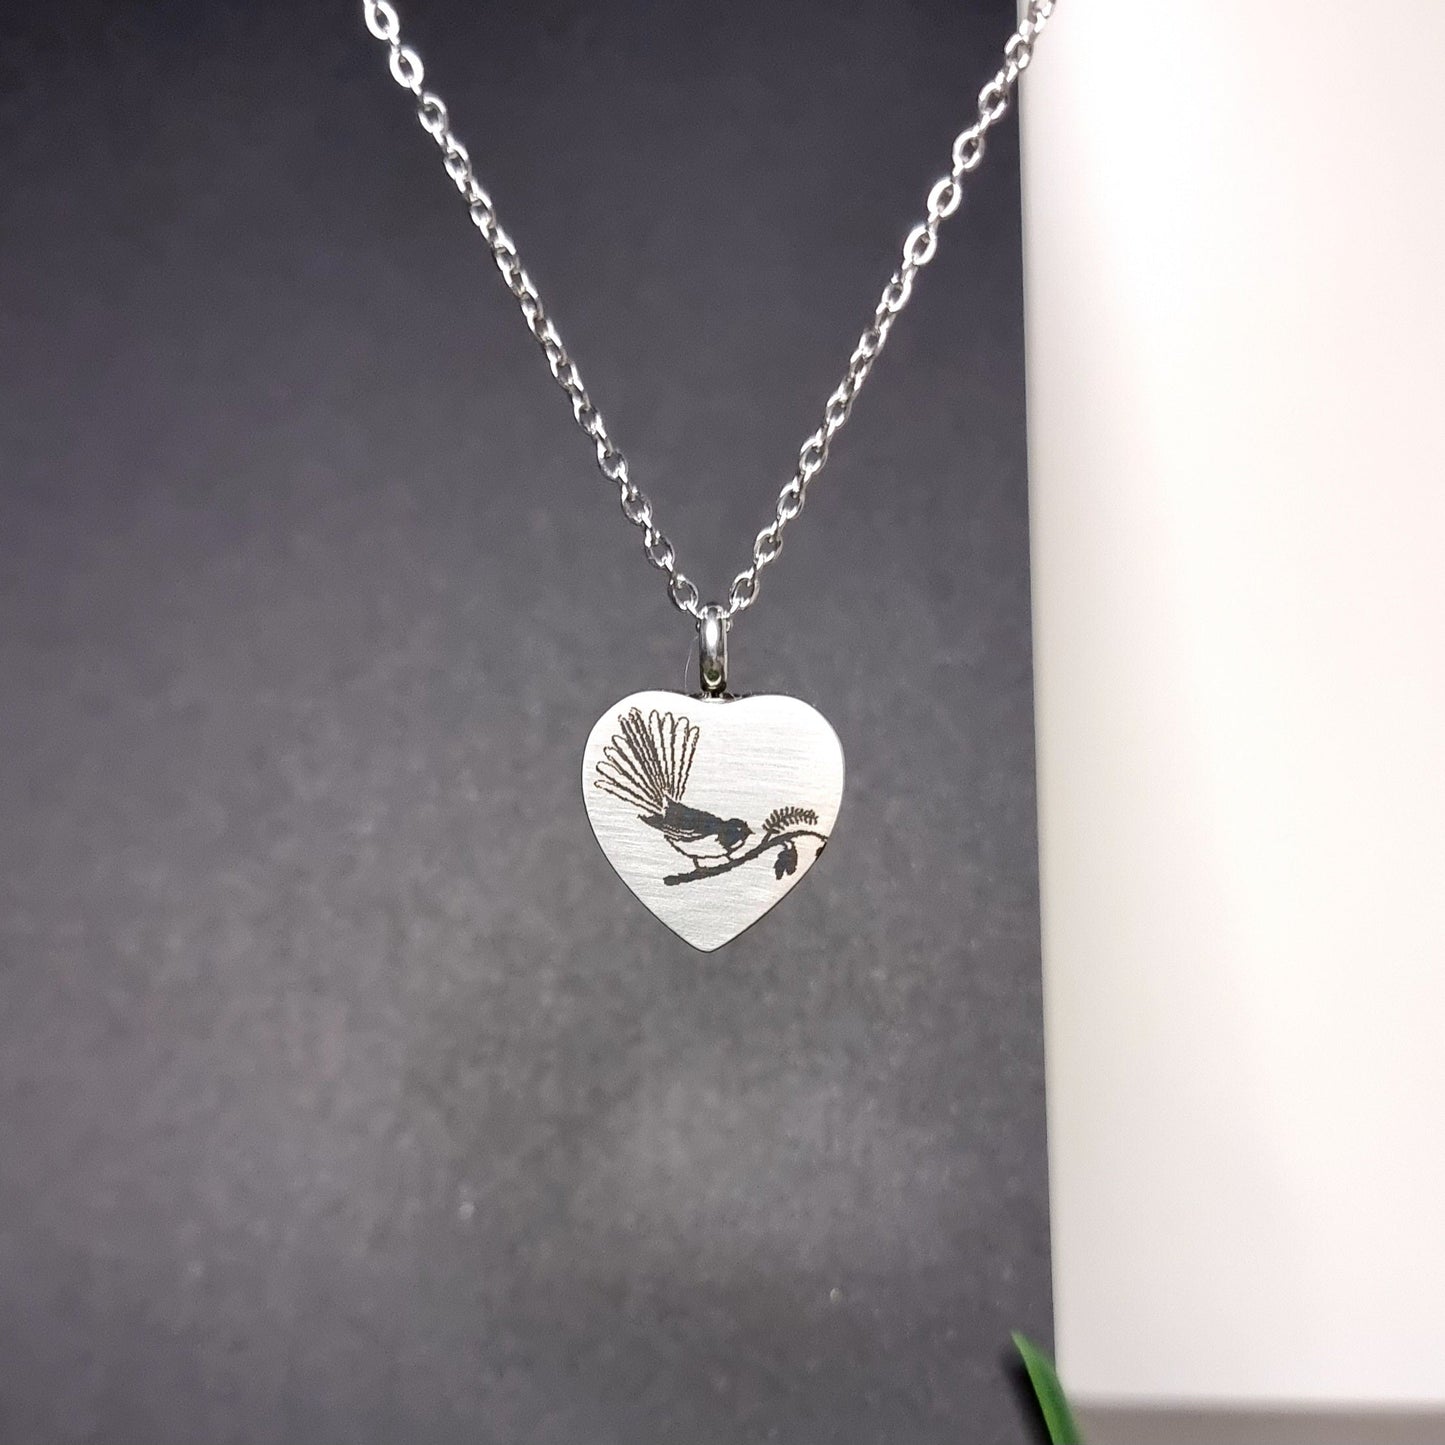 Fantail Engraved Keepsake Memorial Necklace for Urn for cremation ashes or pet hair